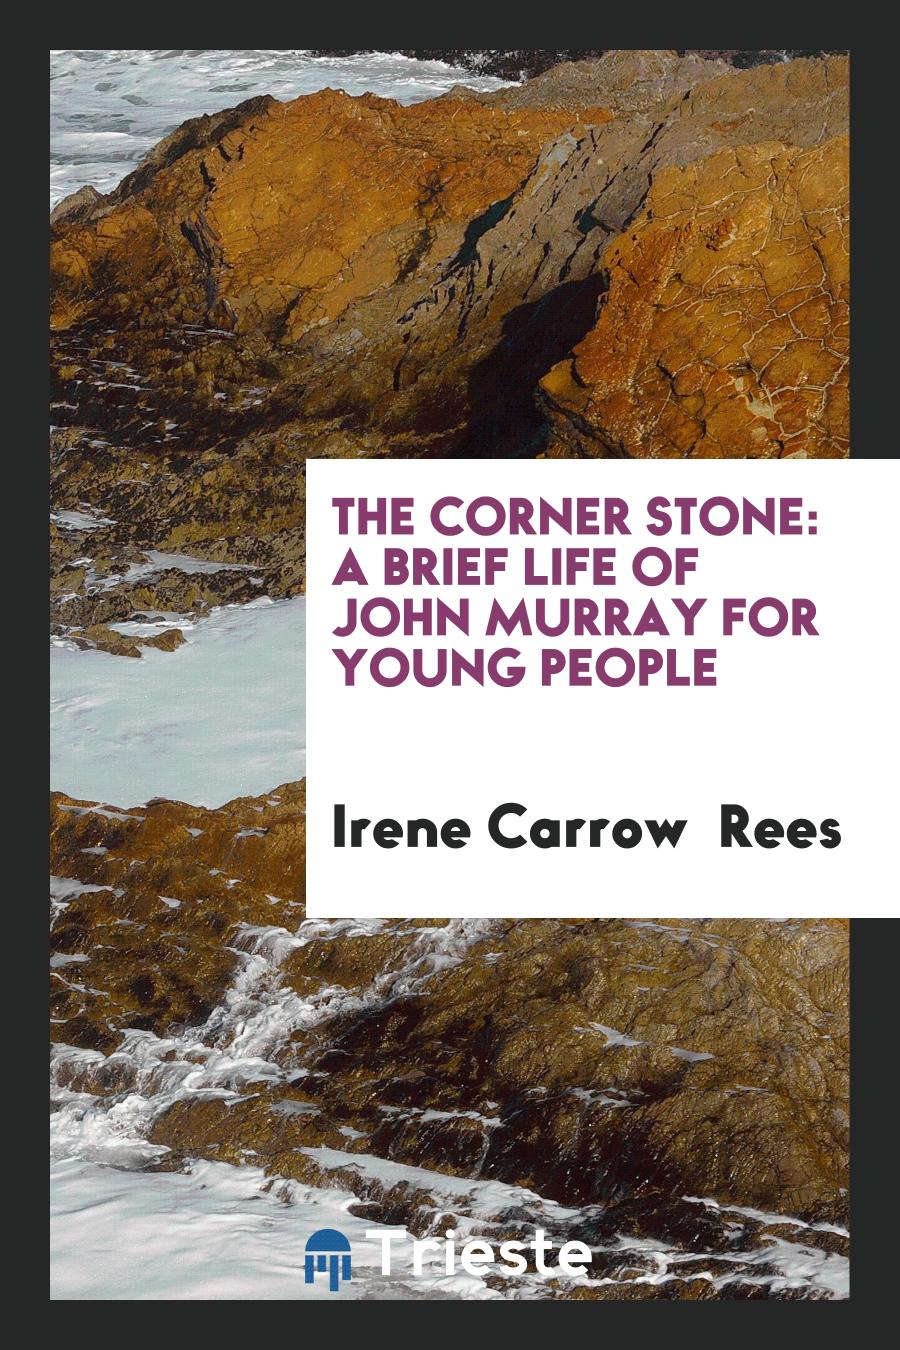 The Corner Stone: A Brief Life of John Murray for Young People